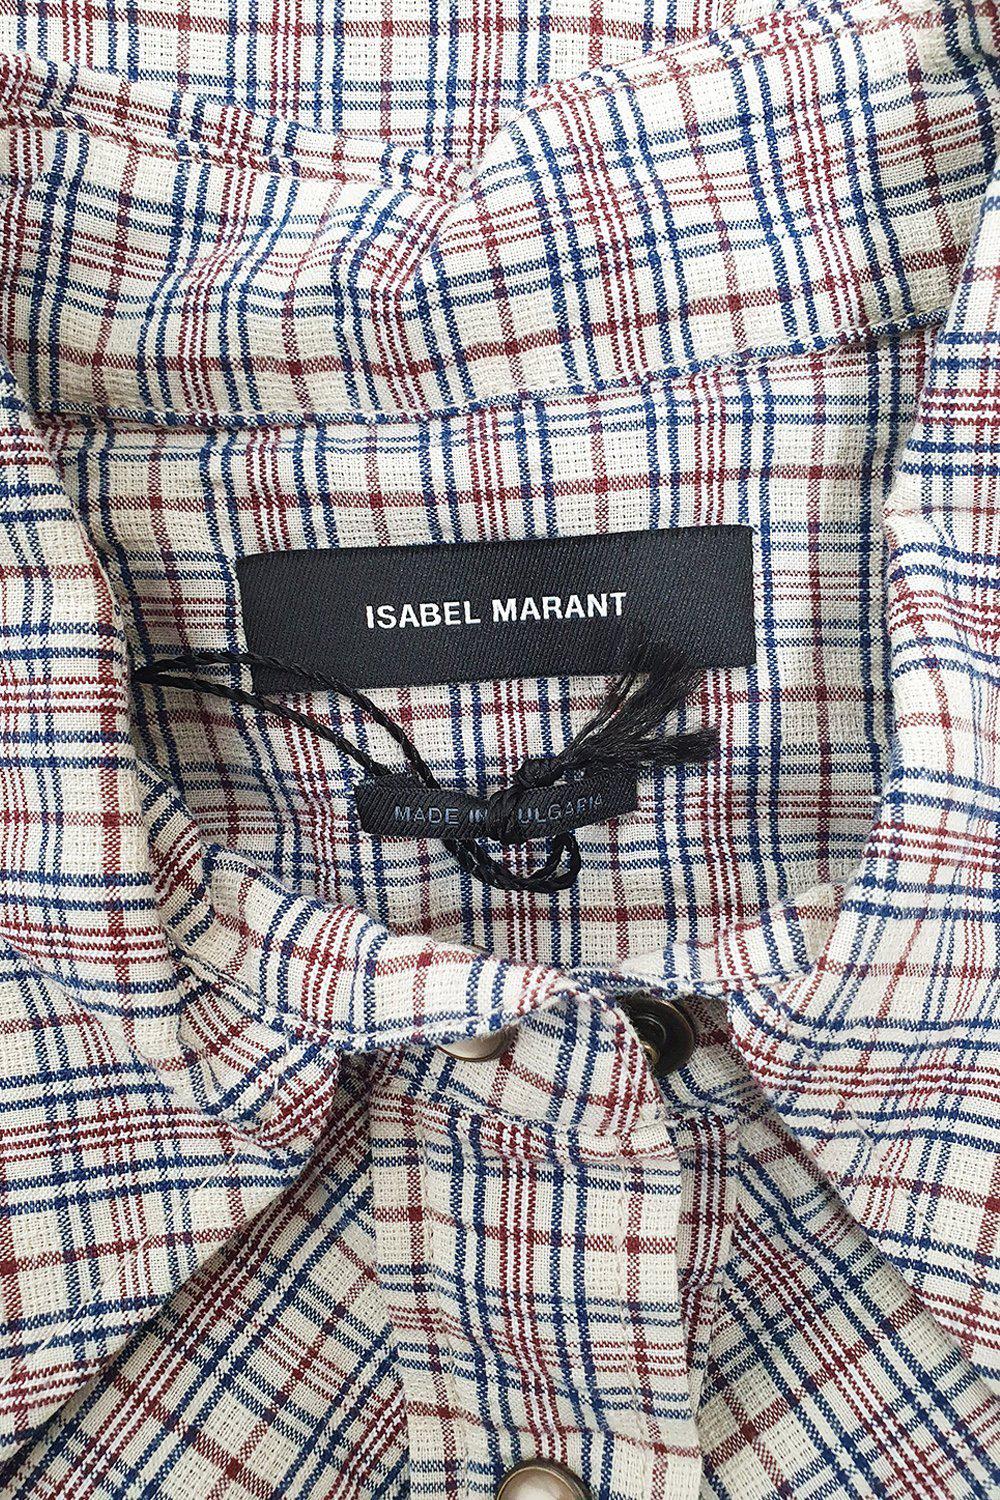 ISABEL MARANT 100% Cotton Pink Grey Checked Cowgirl Style Shirt (38)-Isabel Marant-The Freperie